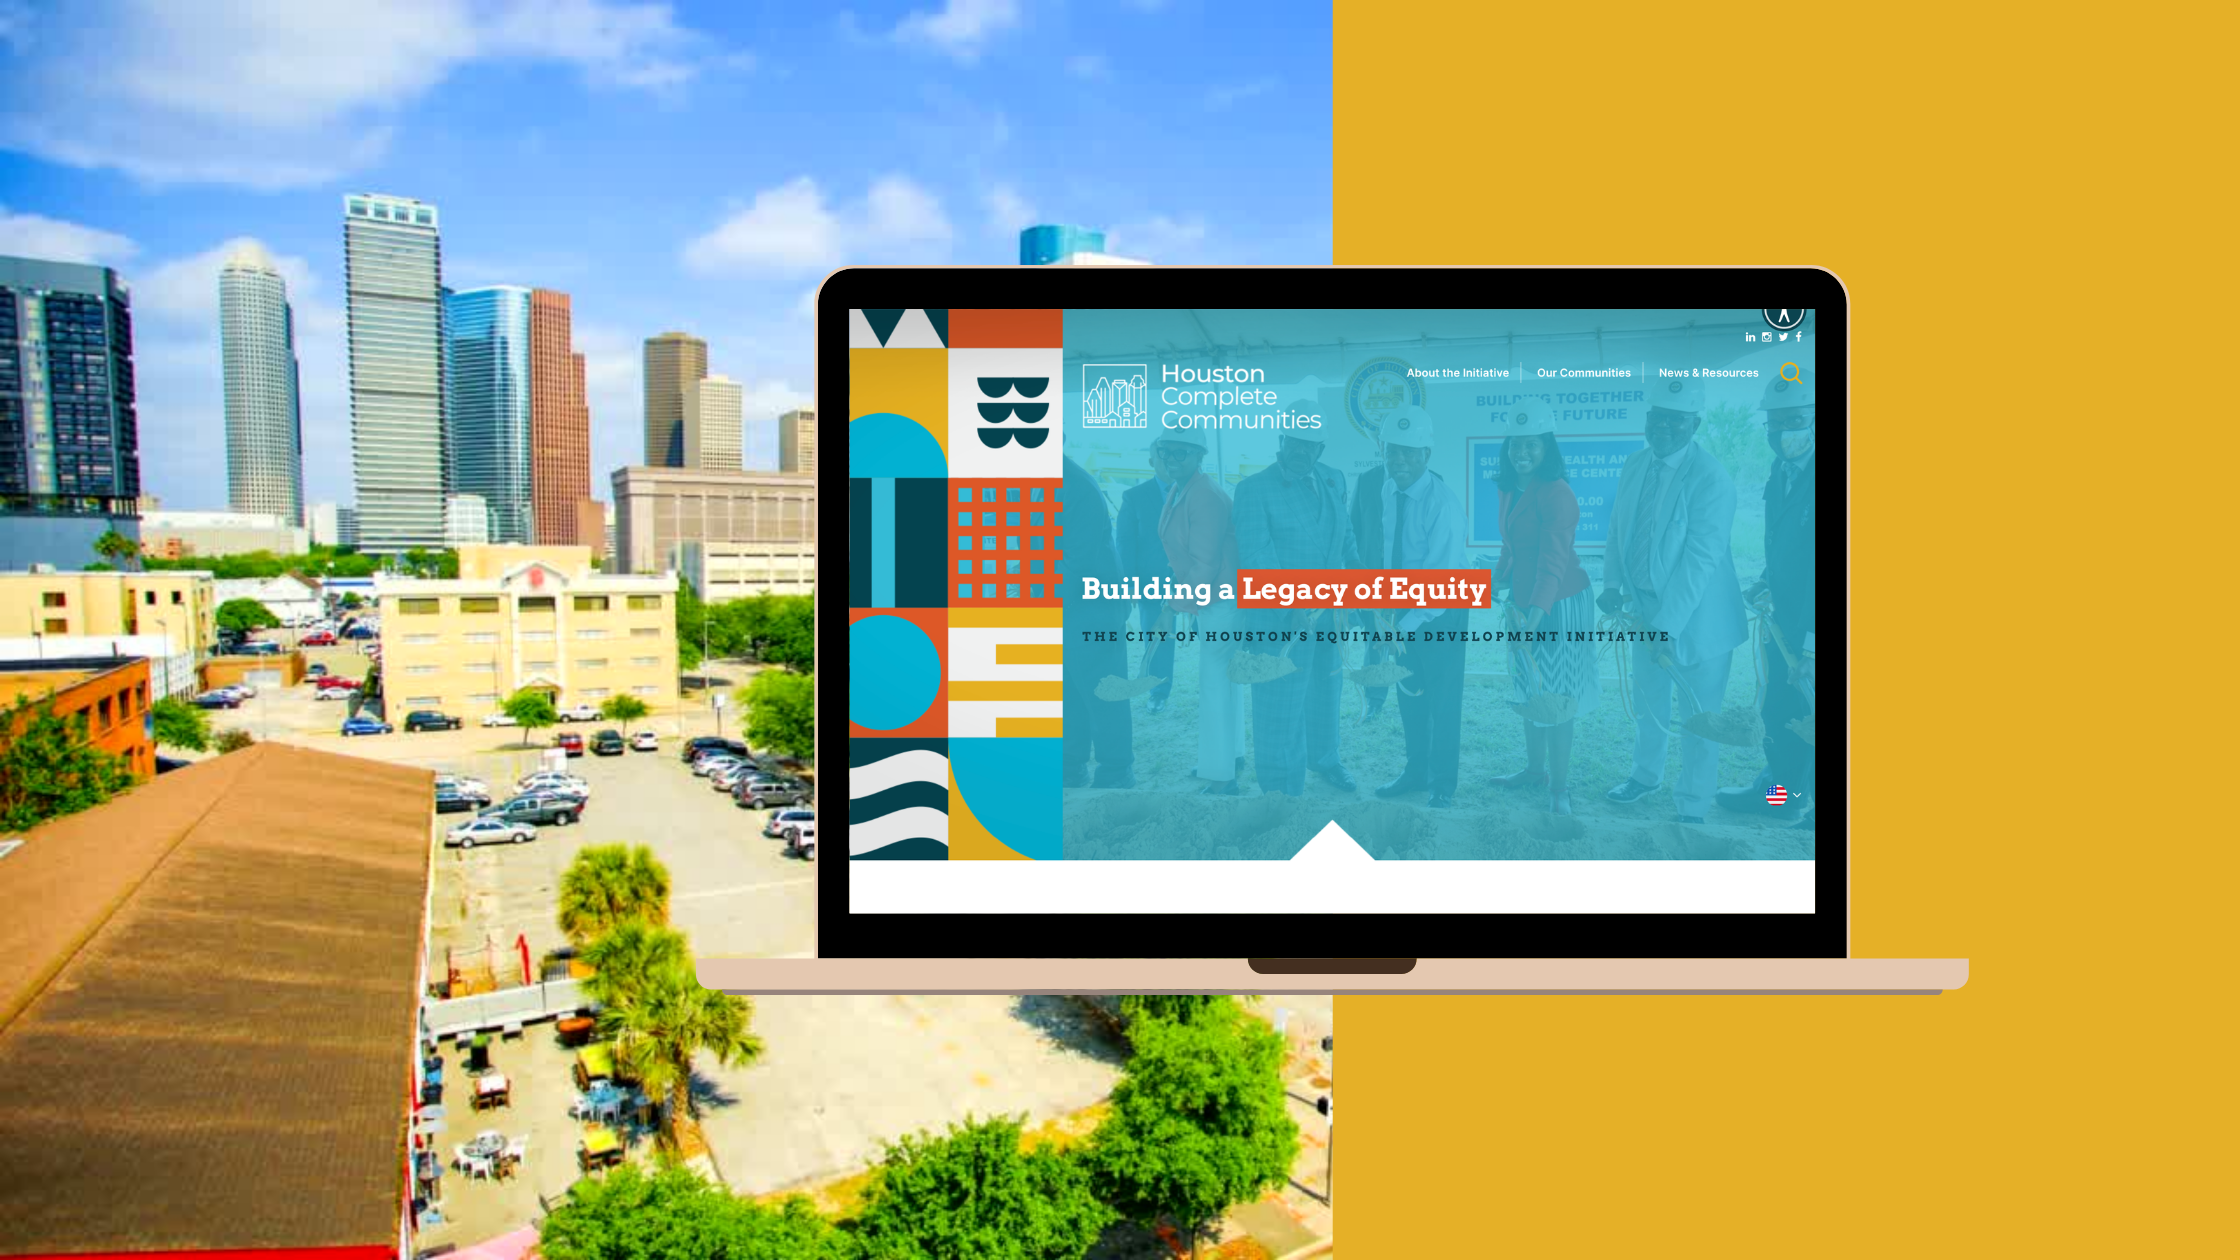 A simple mockup of the Houston Complete Communities website on a split background with the city of Houston on the left and a plain gold background on the right.